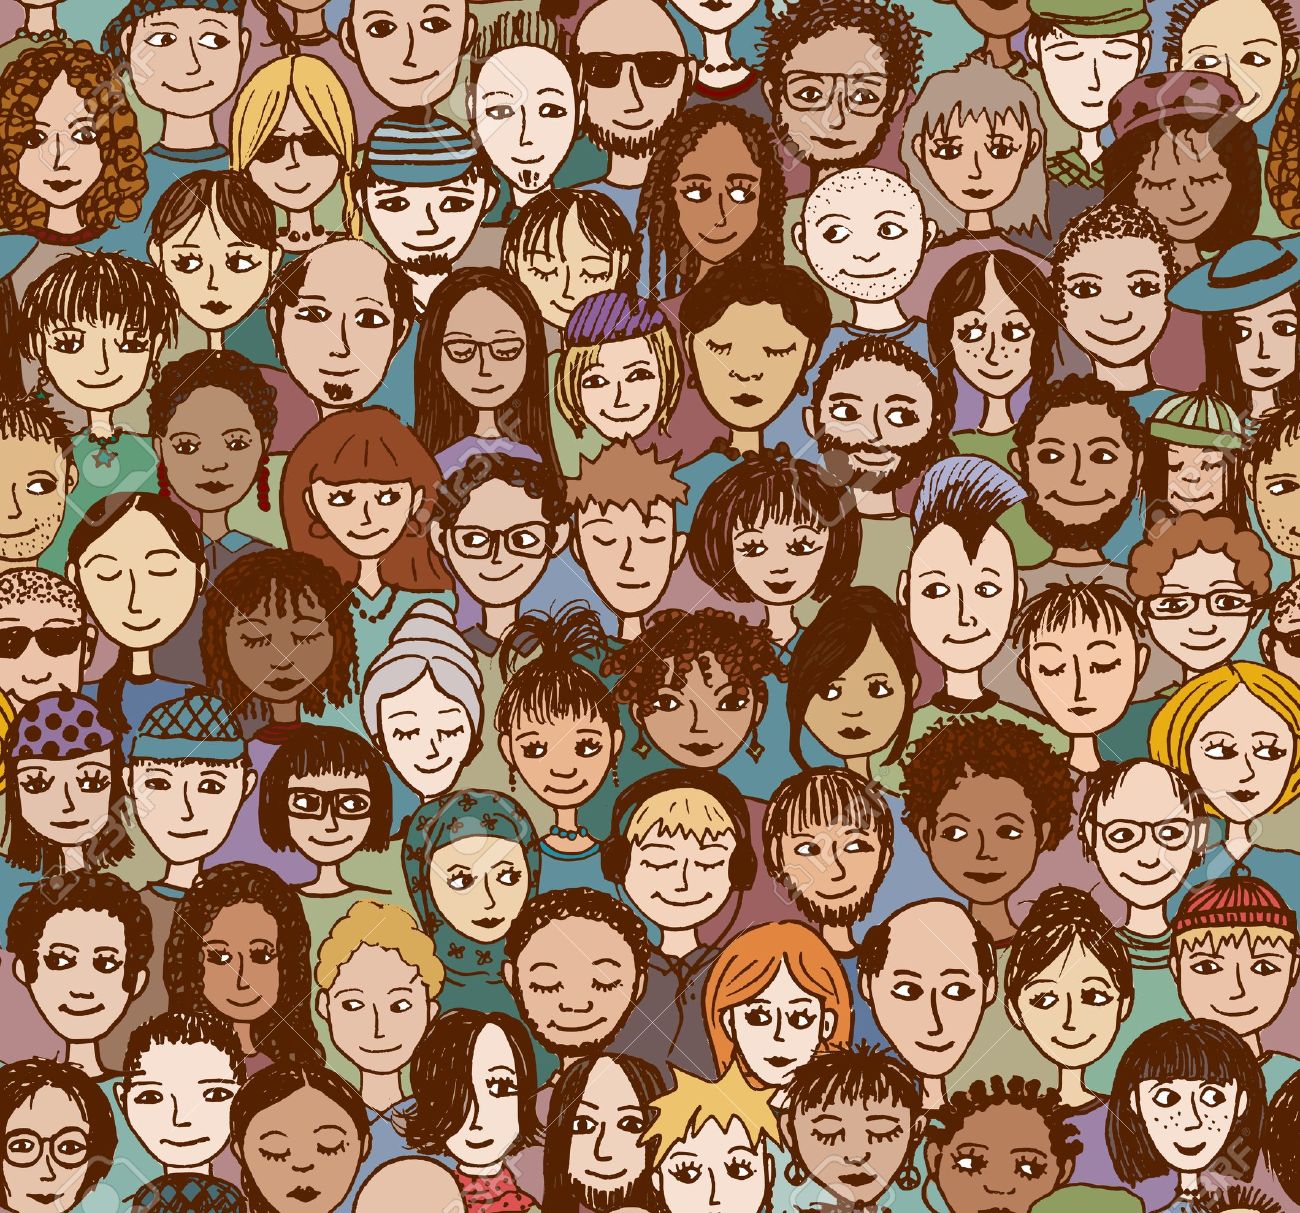 48042732-Happy-people-hand-drawn-seamless-pattern-of-a-crowd-of-many-different-people-from-diverse-ethnic-bac-Stock-Vector.jpg